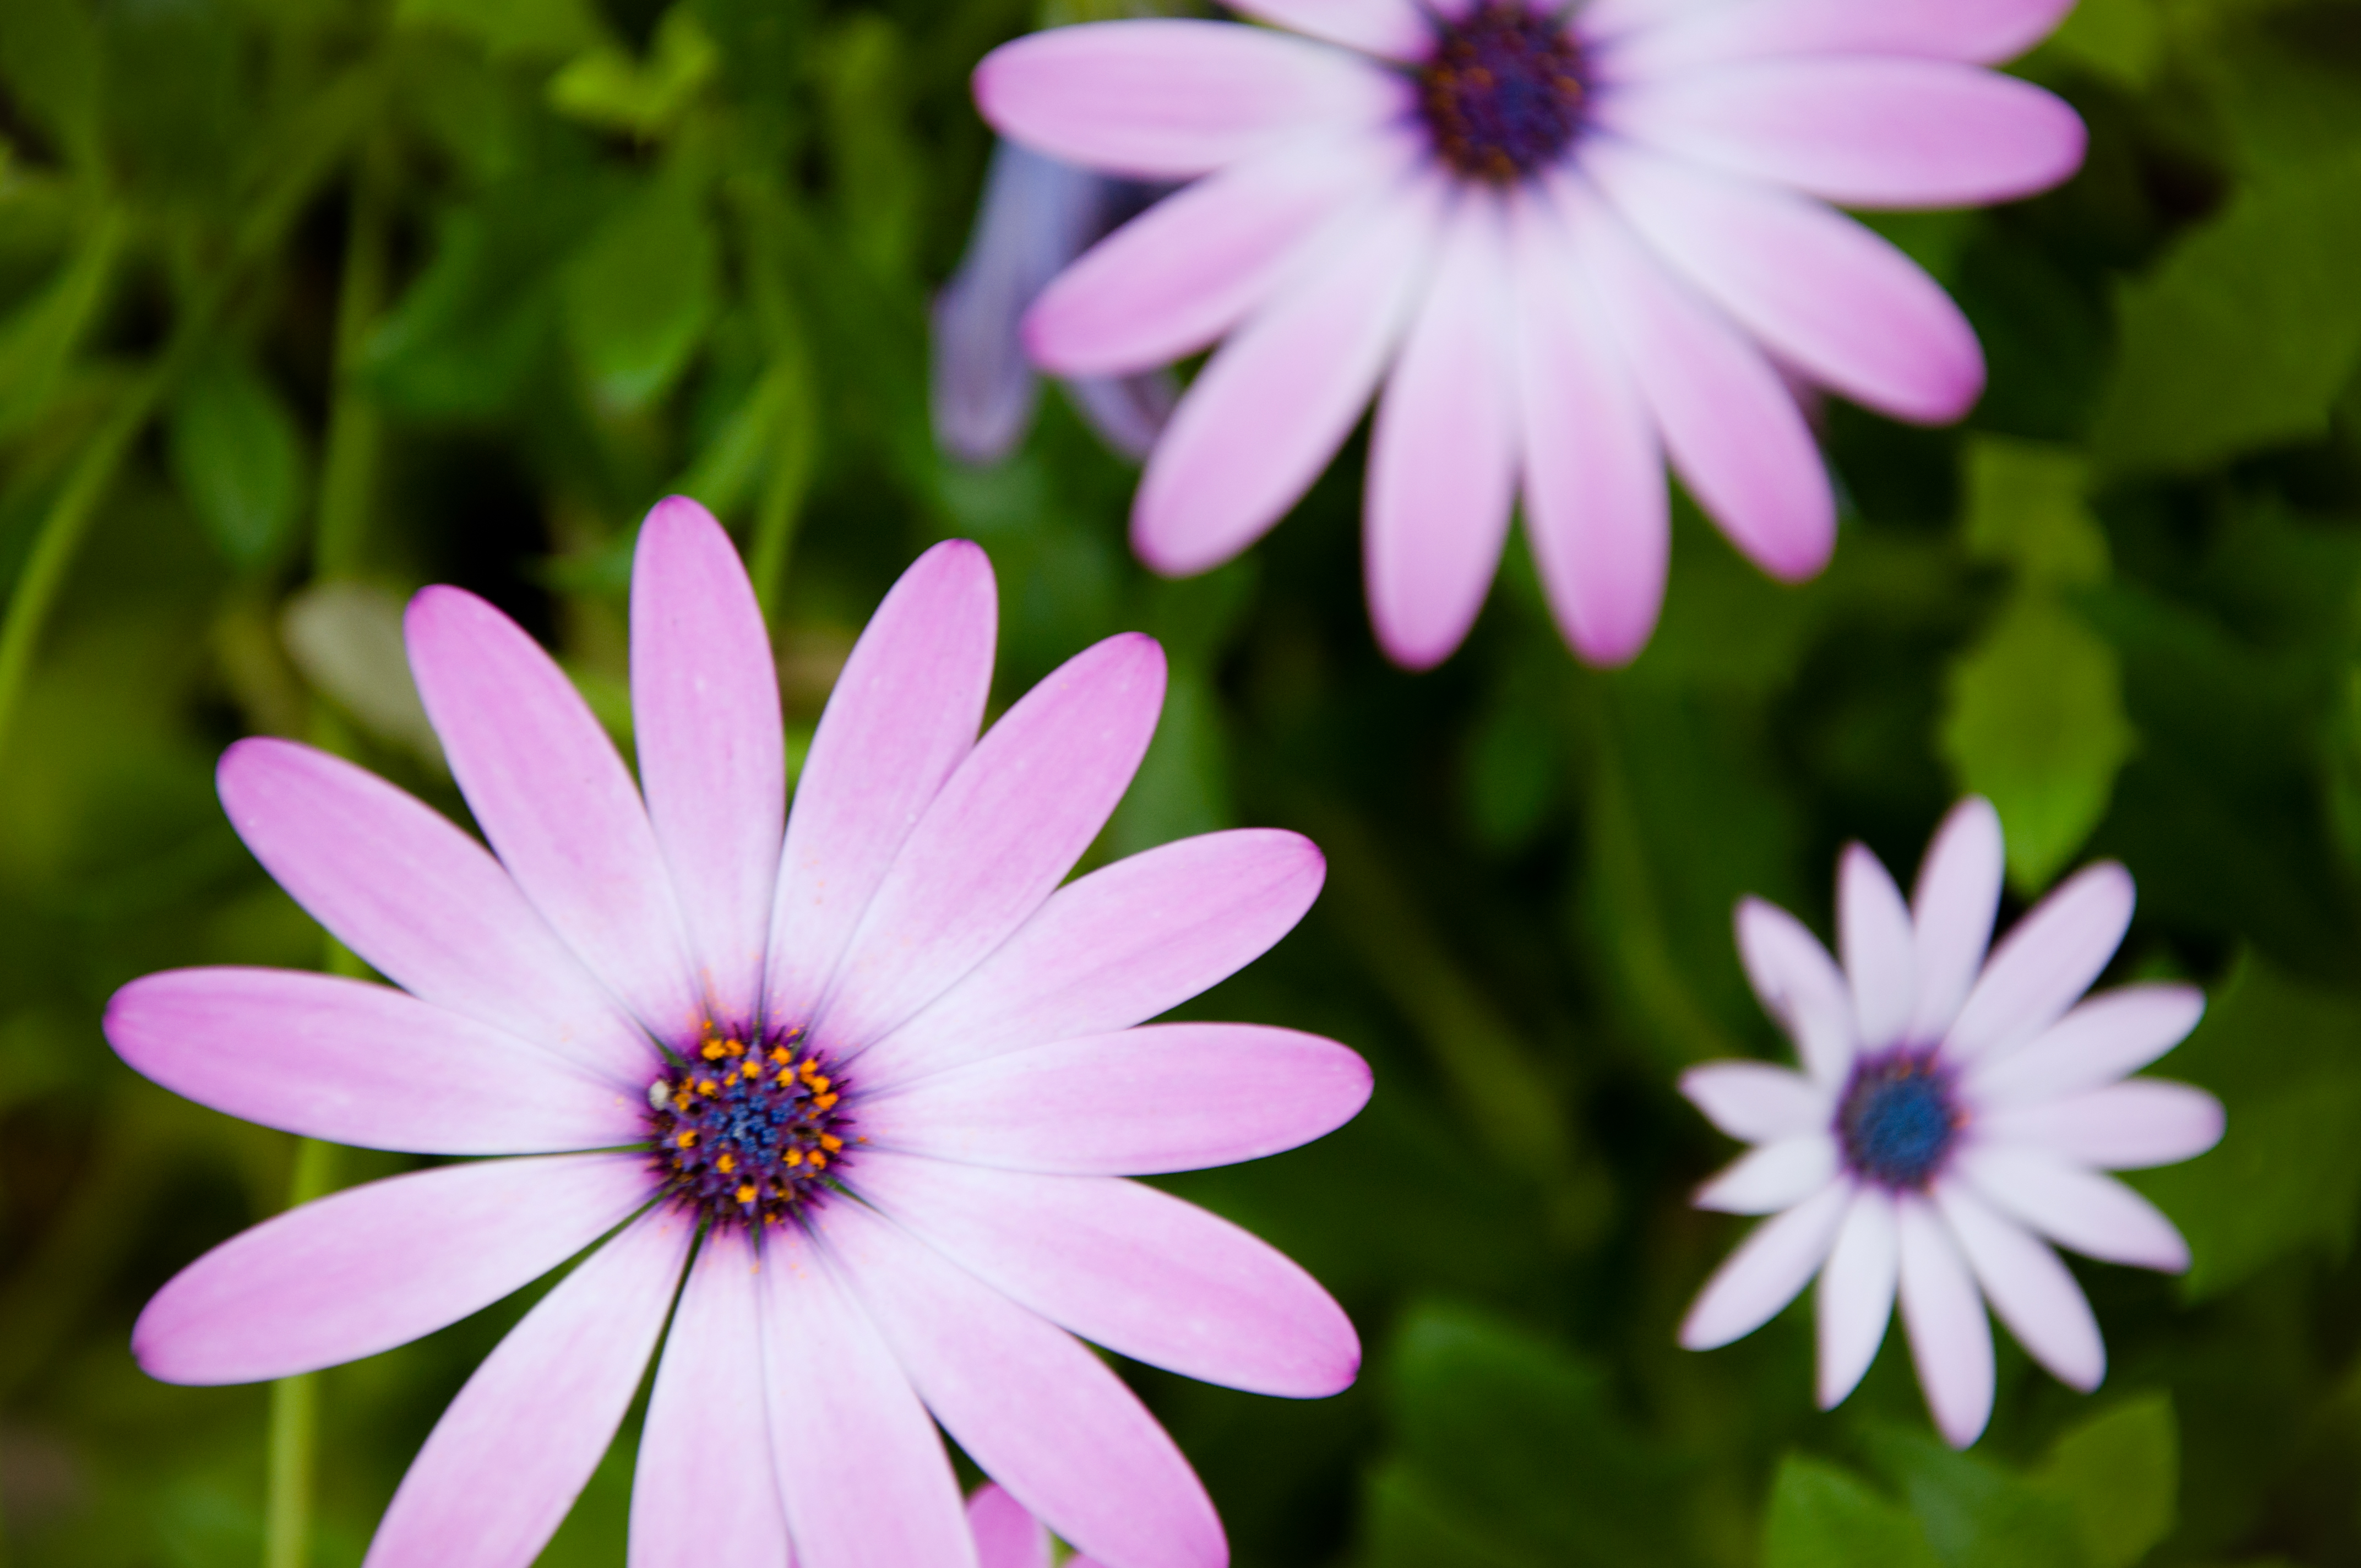 Purple flowers, Agriculture, Outdoors, Green, Grow, HQ Photo